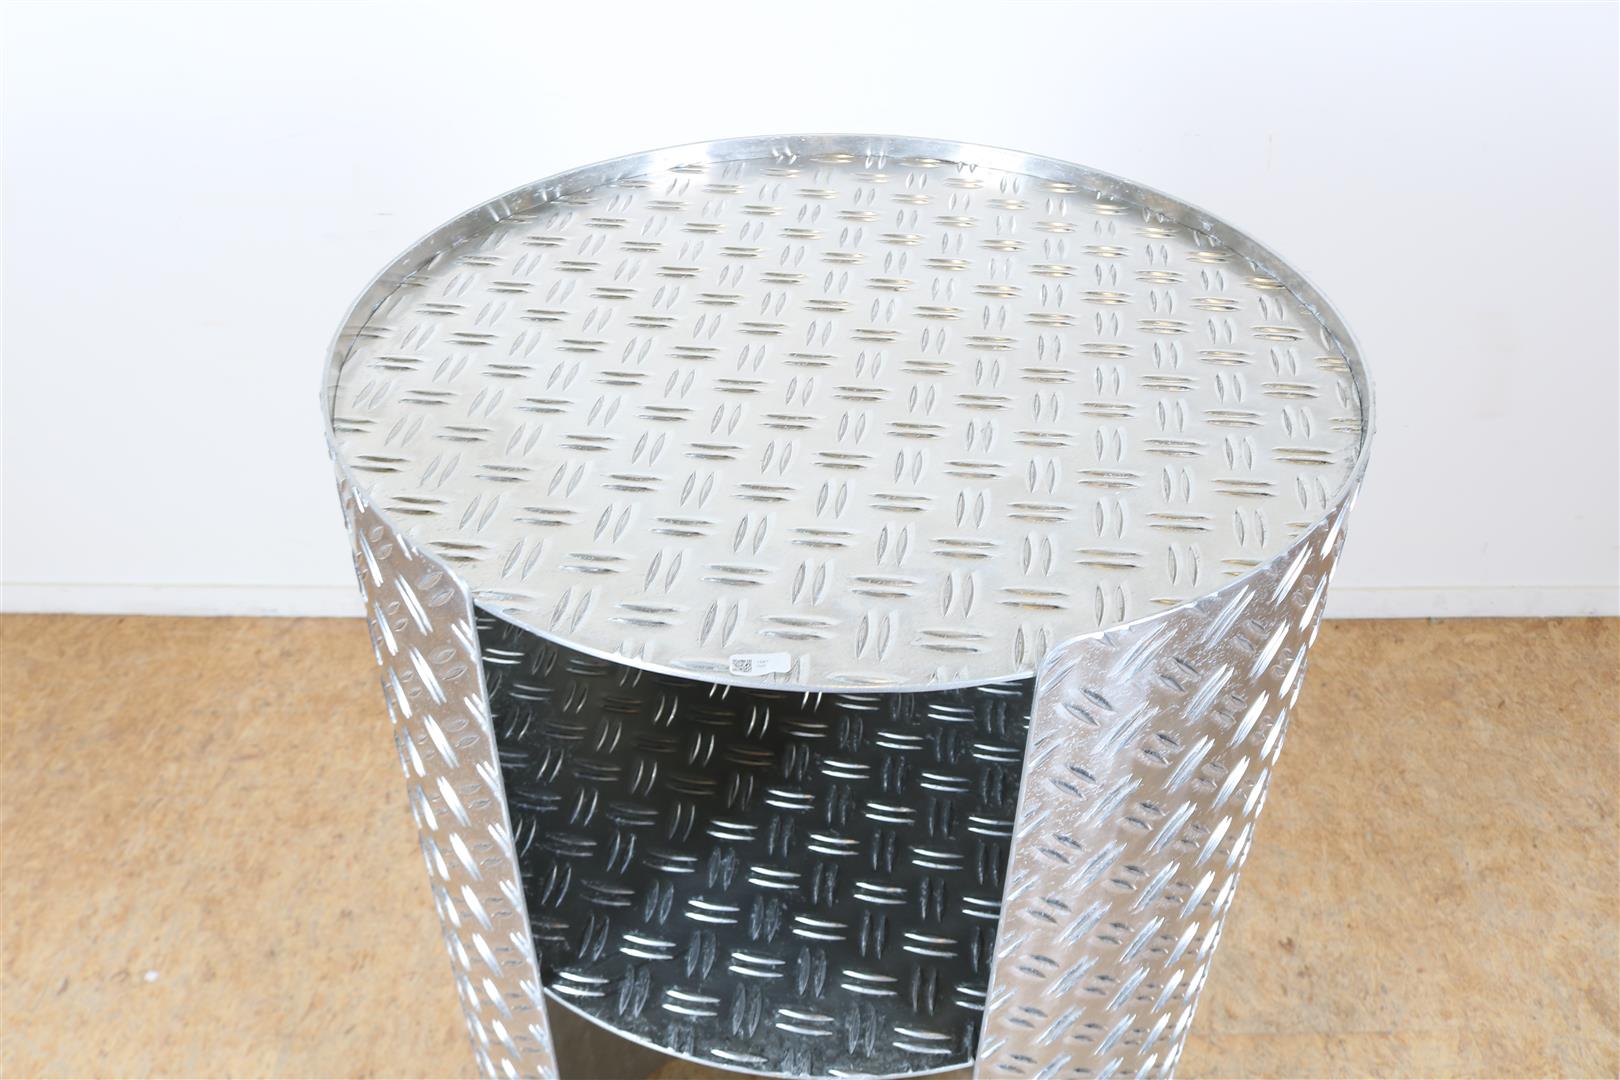 Cylindrical aluminum diamond plate design standing table with shelf, 110 x 57 cm. - Image 4 of 4